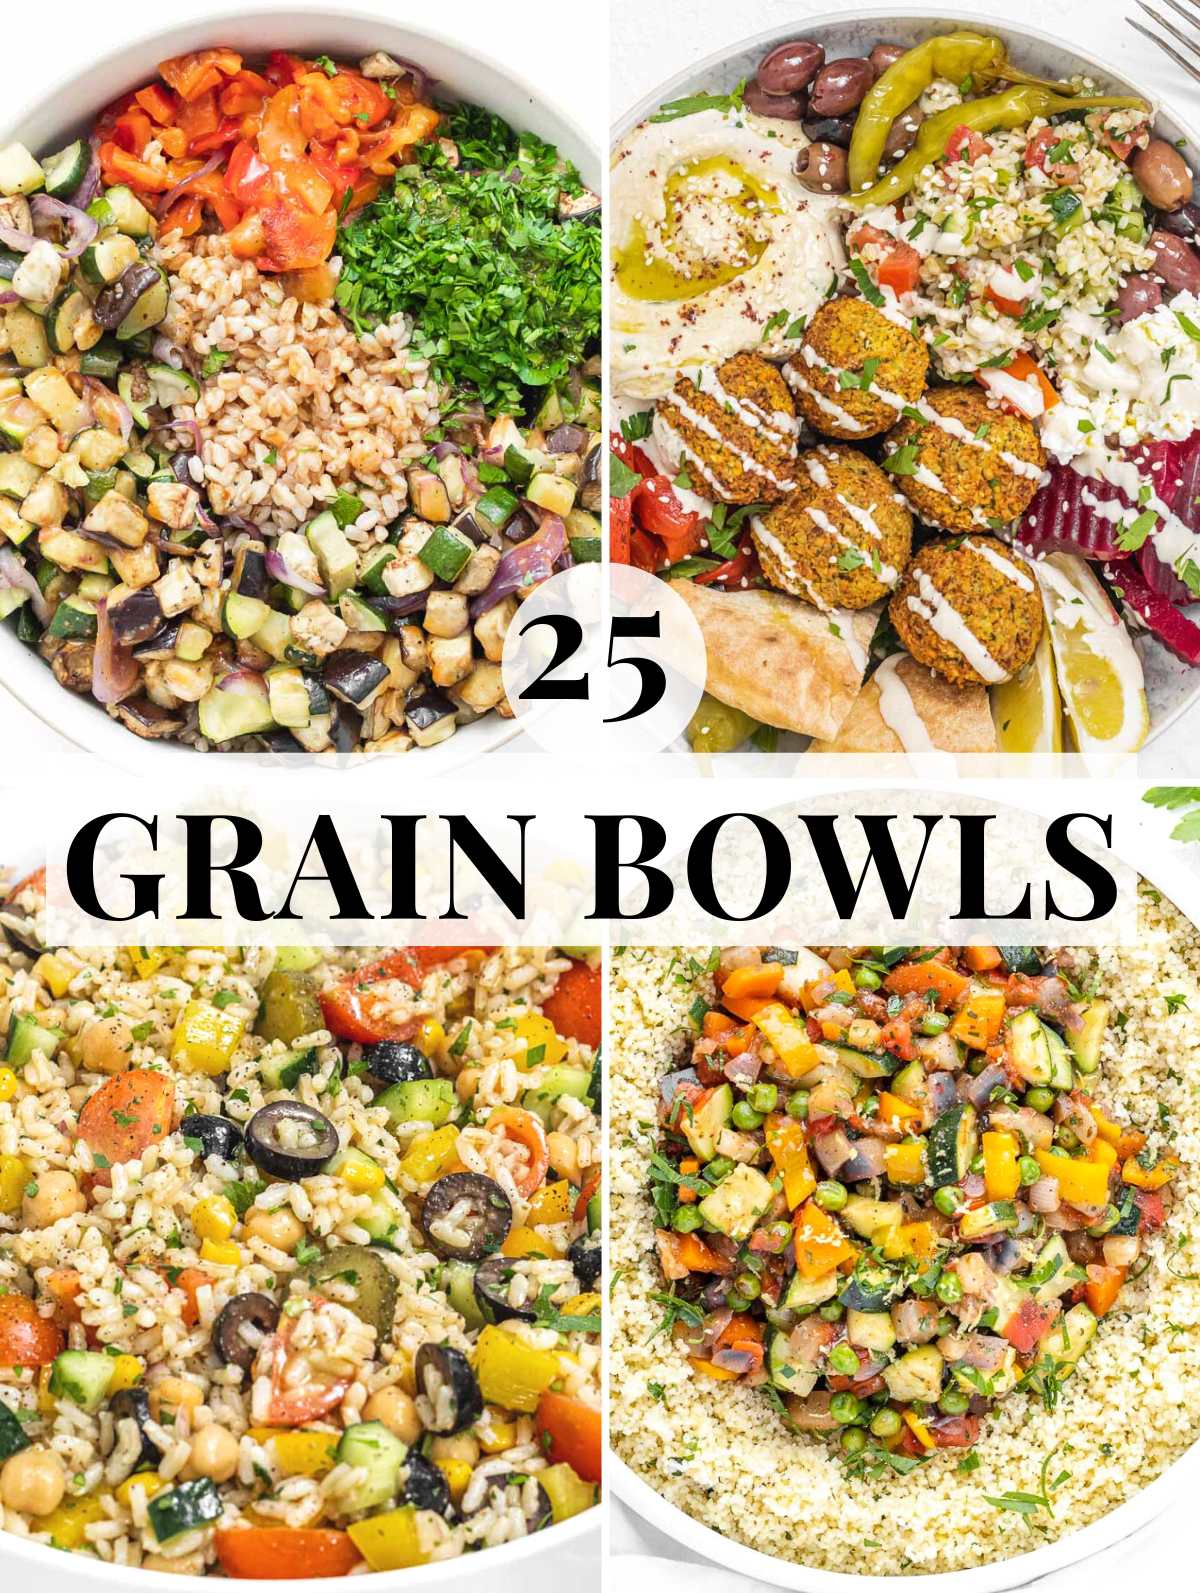 Grain bowl recipes with protein and healthy fats